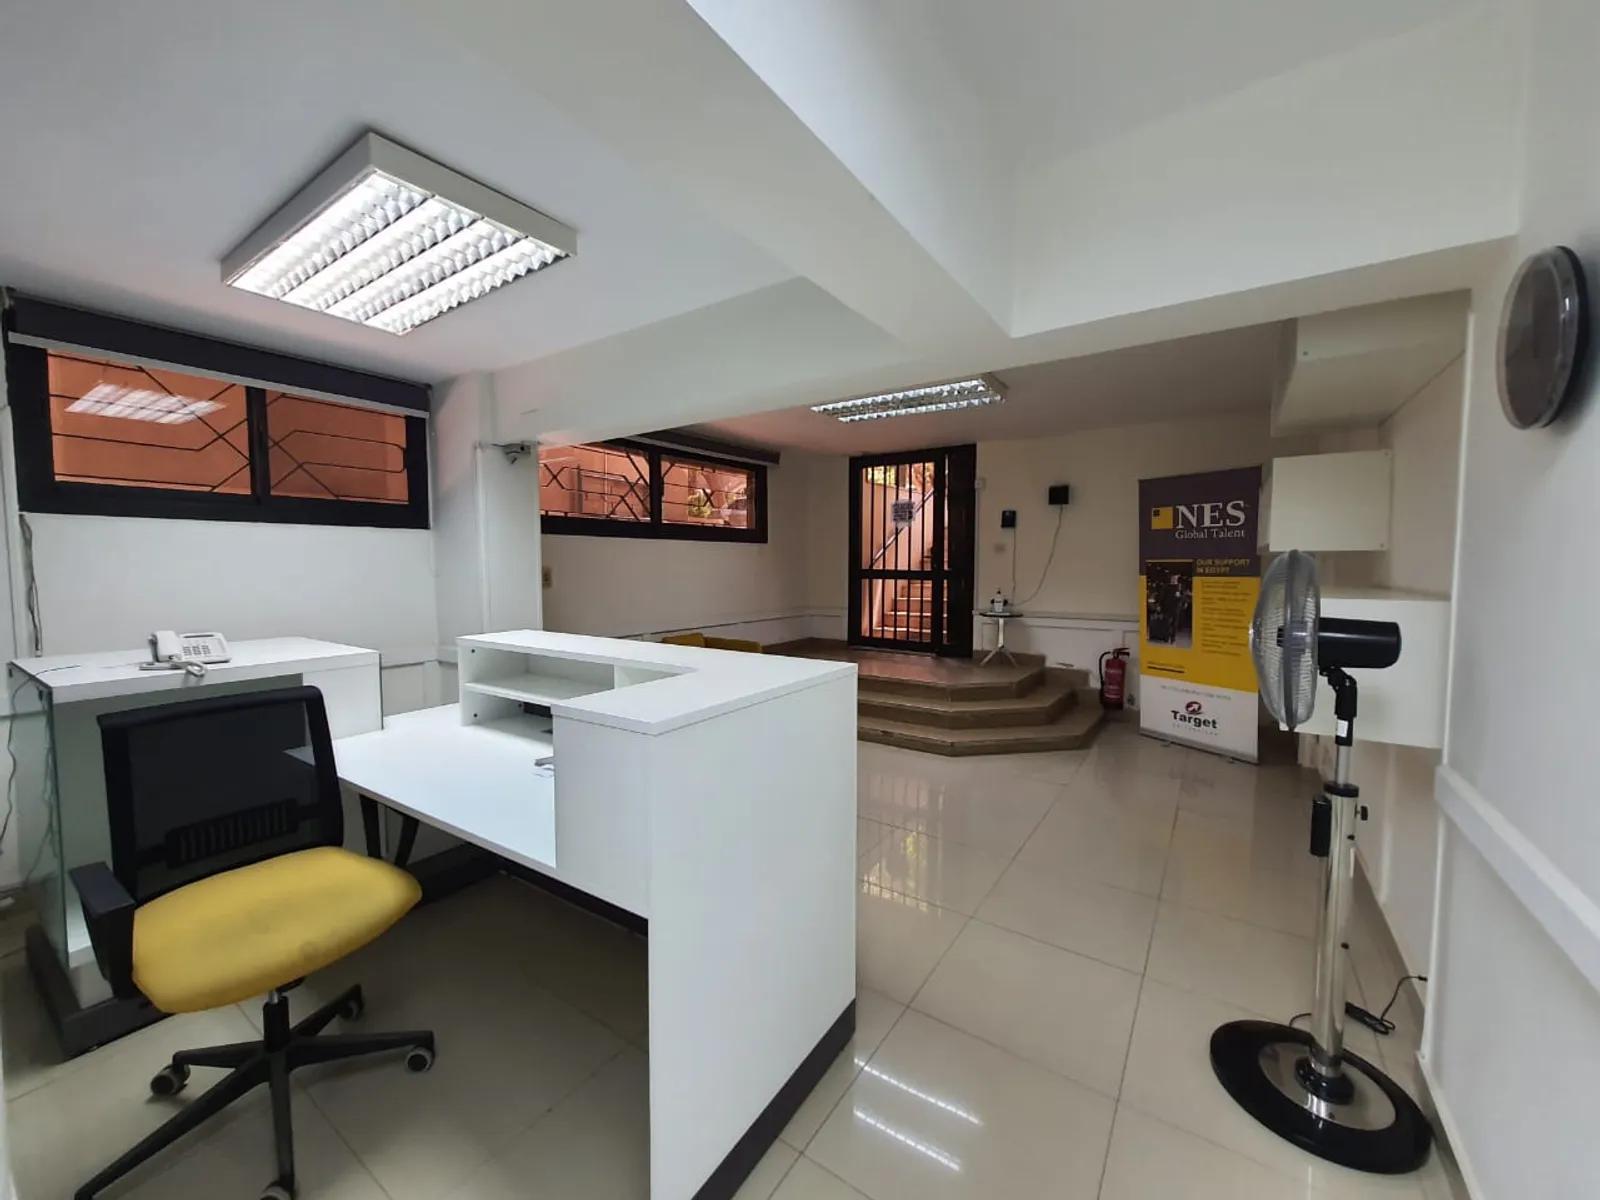 Office spaces For Sale In Maadi Maadi Sarayat Area: 220 m² consists of 7 Bedrooms 2 Bathrooms Semi furnished 5 stars #5474